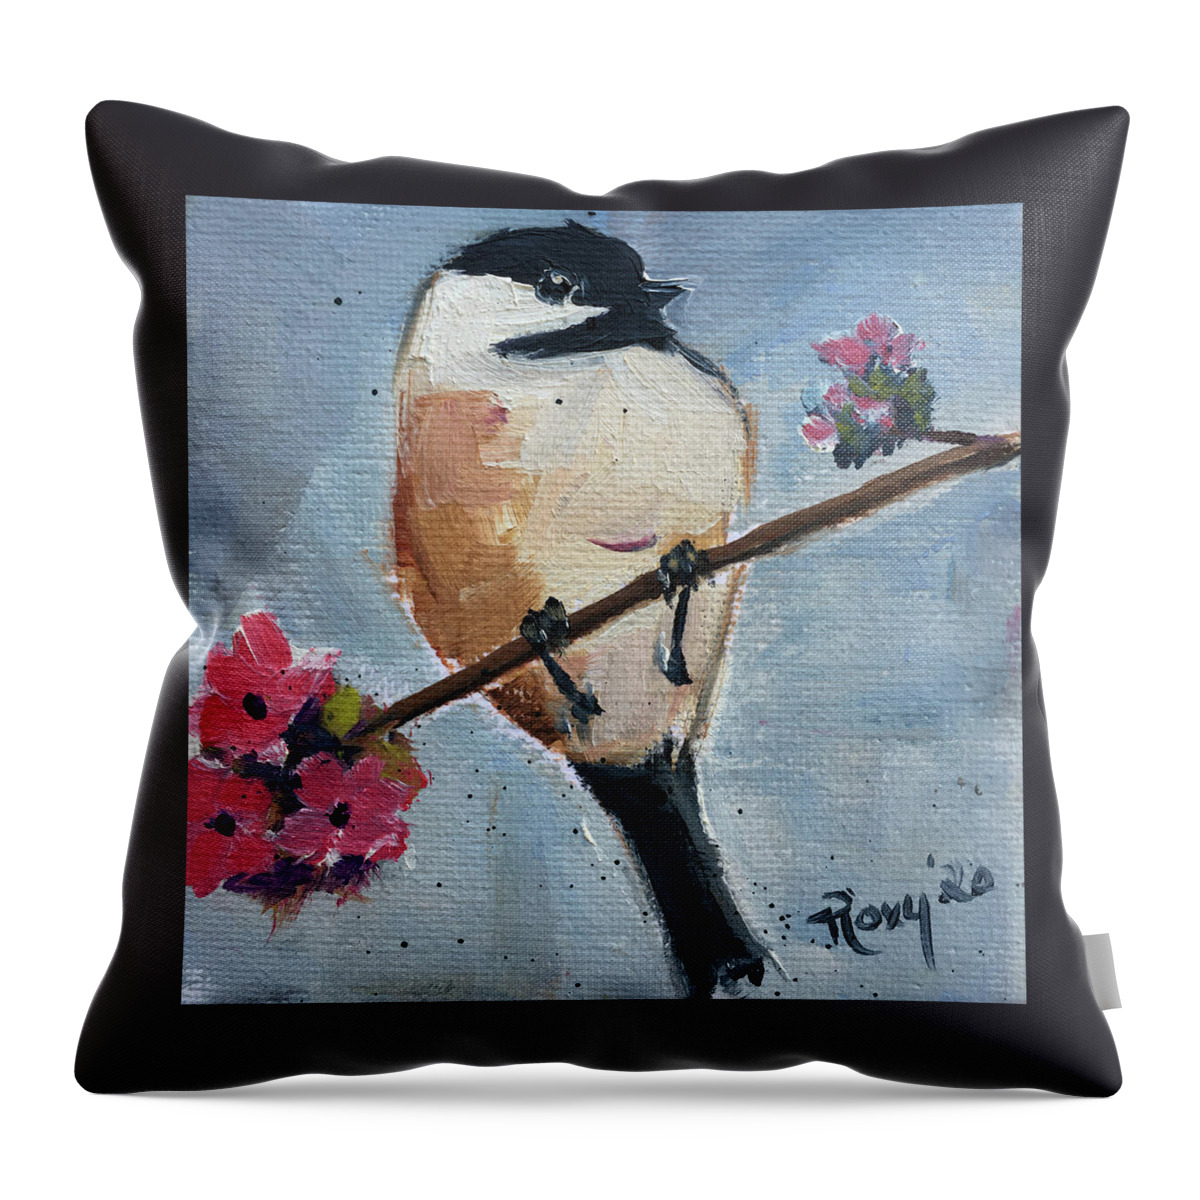 Chickadee Throw Pillow featuring the painting Chickadee 3 by Roxy Rich